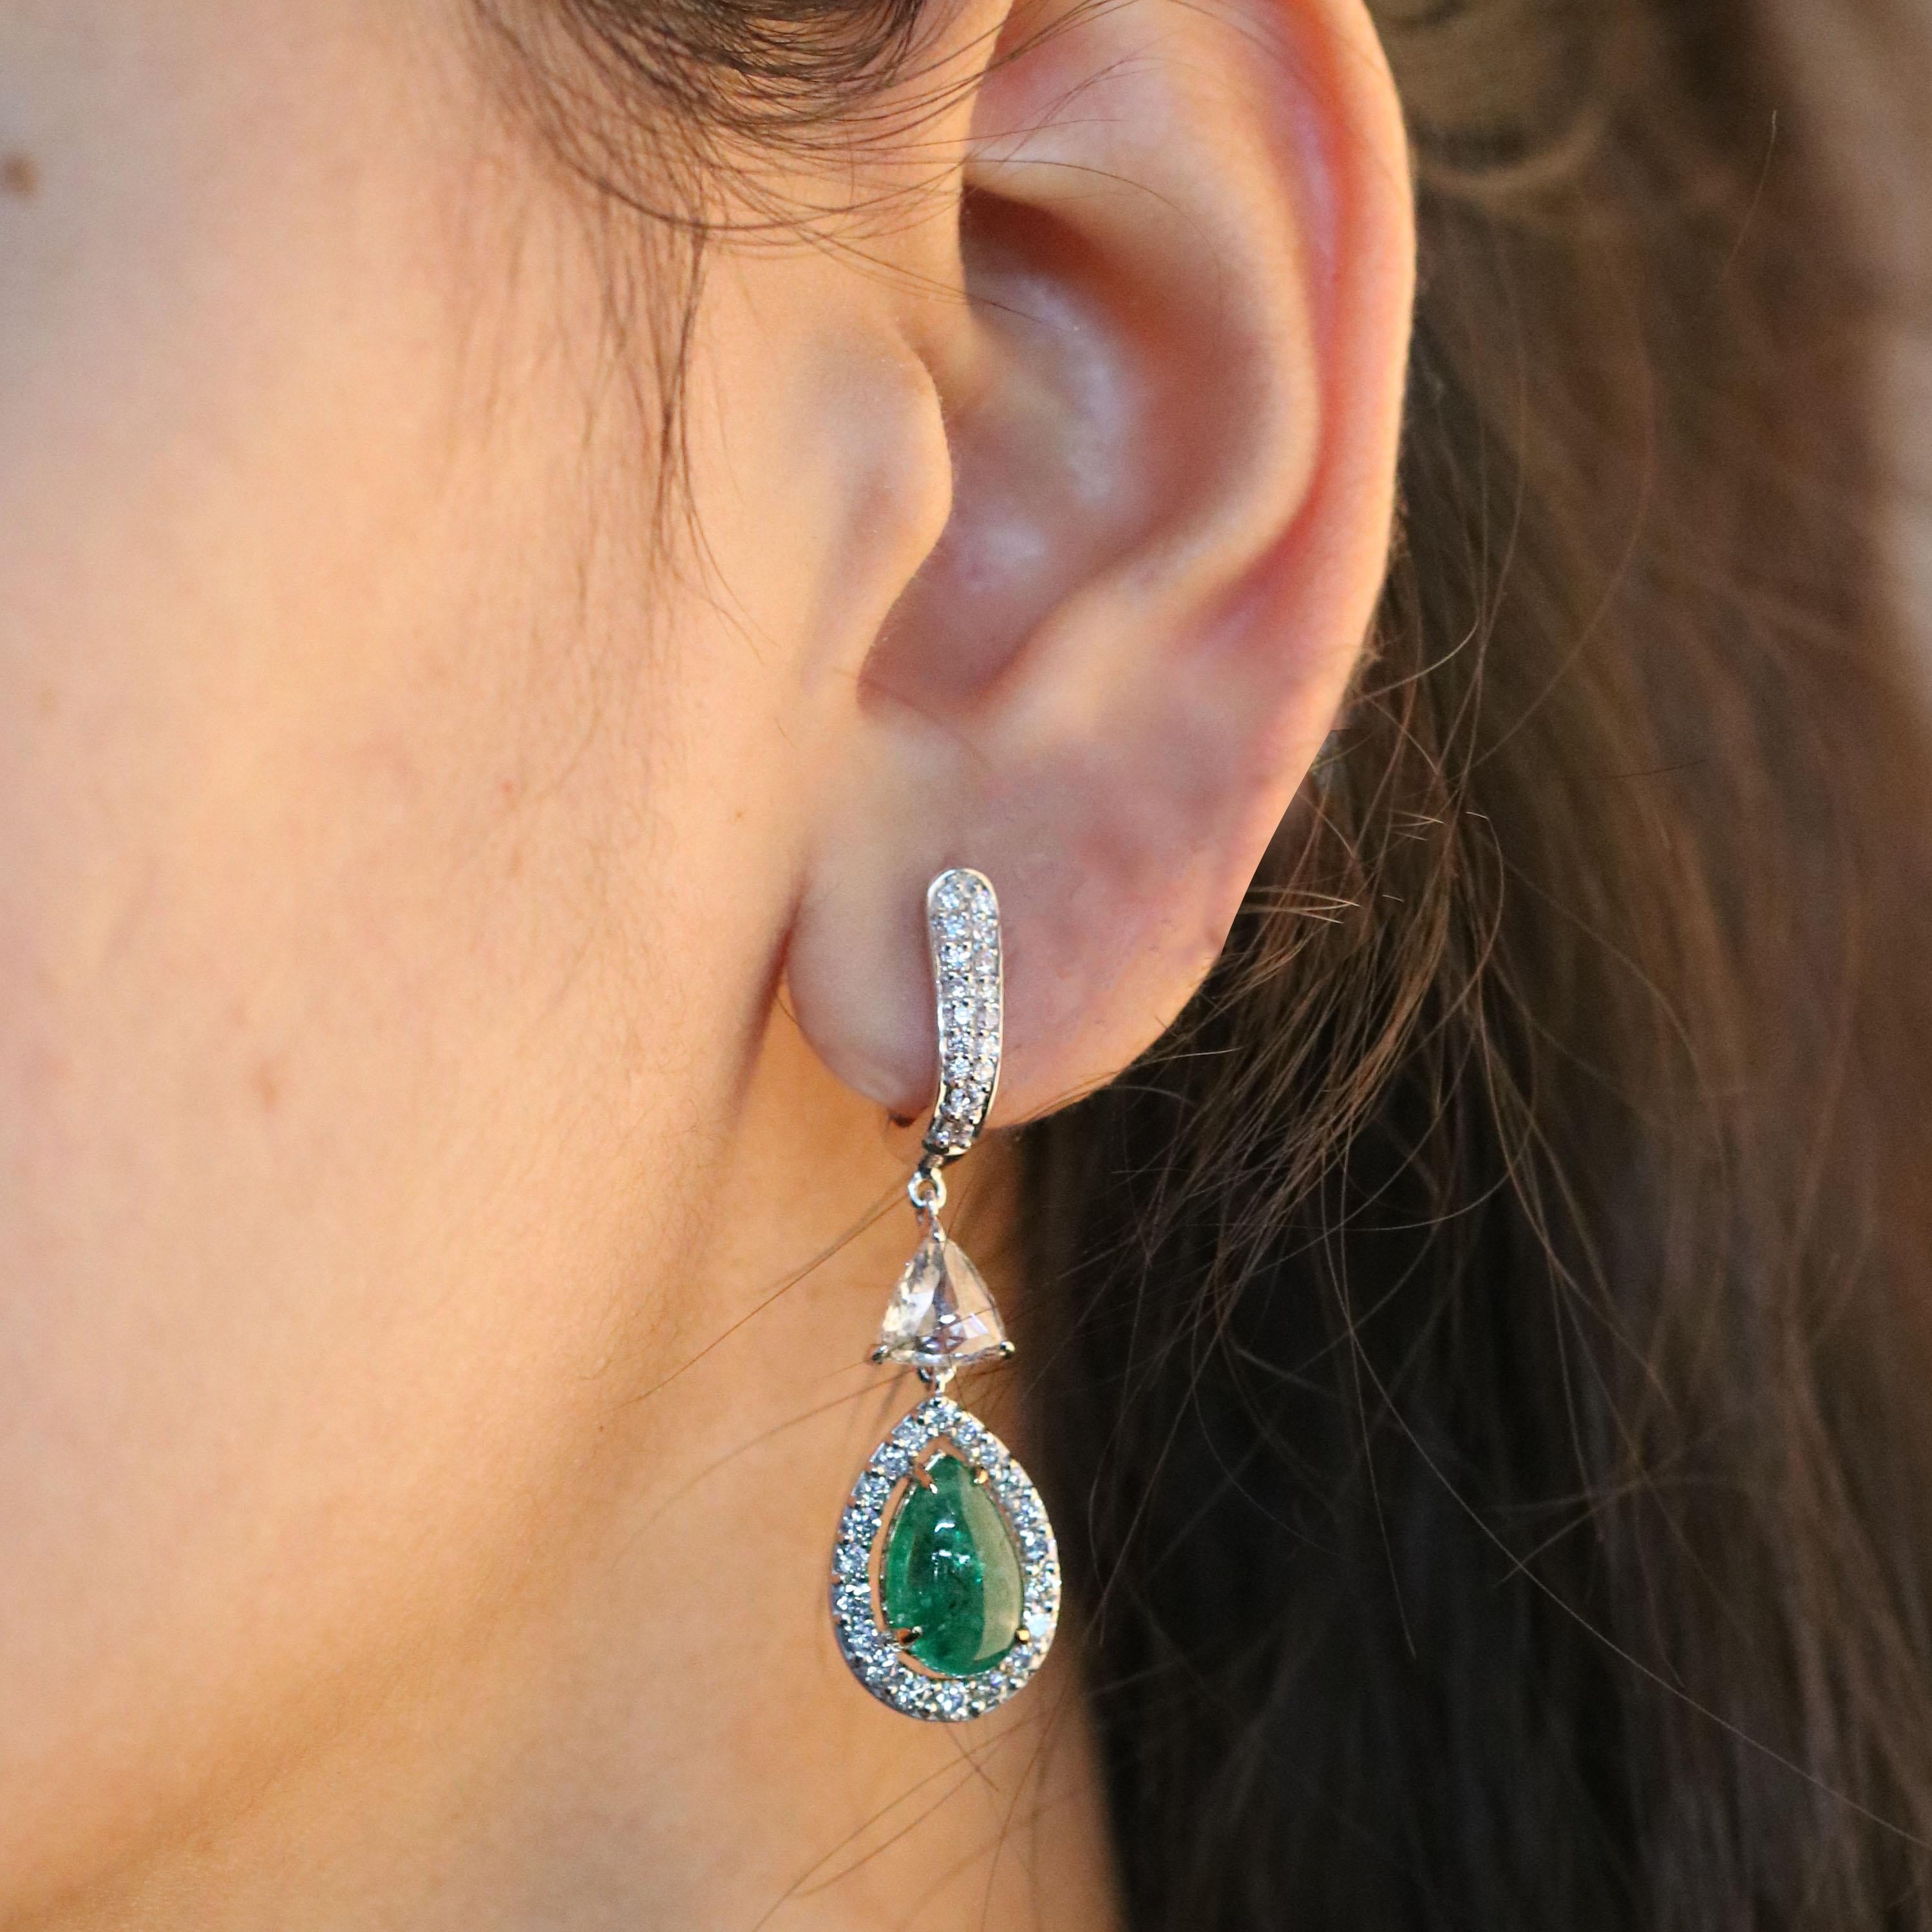 Gross Weight: 7.17 Grams
Diamond Weight: 2.49 cts
Emerald Weight: 4.42 cts
IGI Certificate: 31J857171811

Video of the product can be shared on request.

Keeping it simple never looked as elegant as this pair of 18K white gold drop earrings adorned